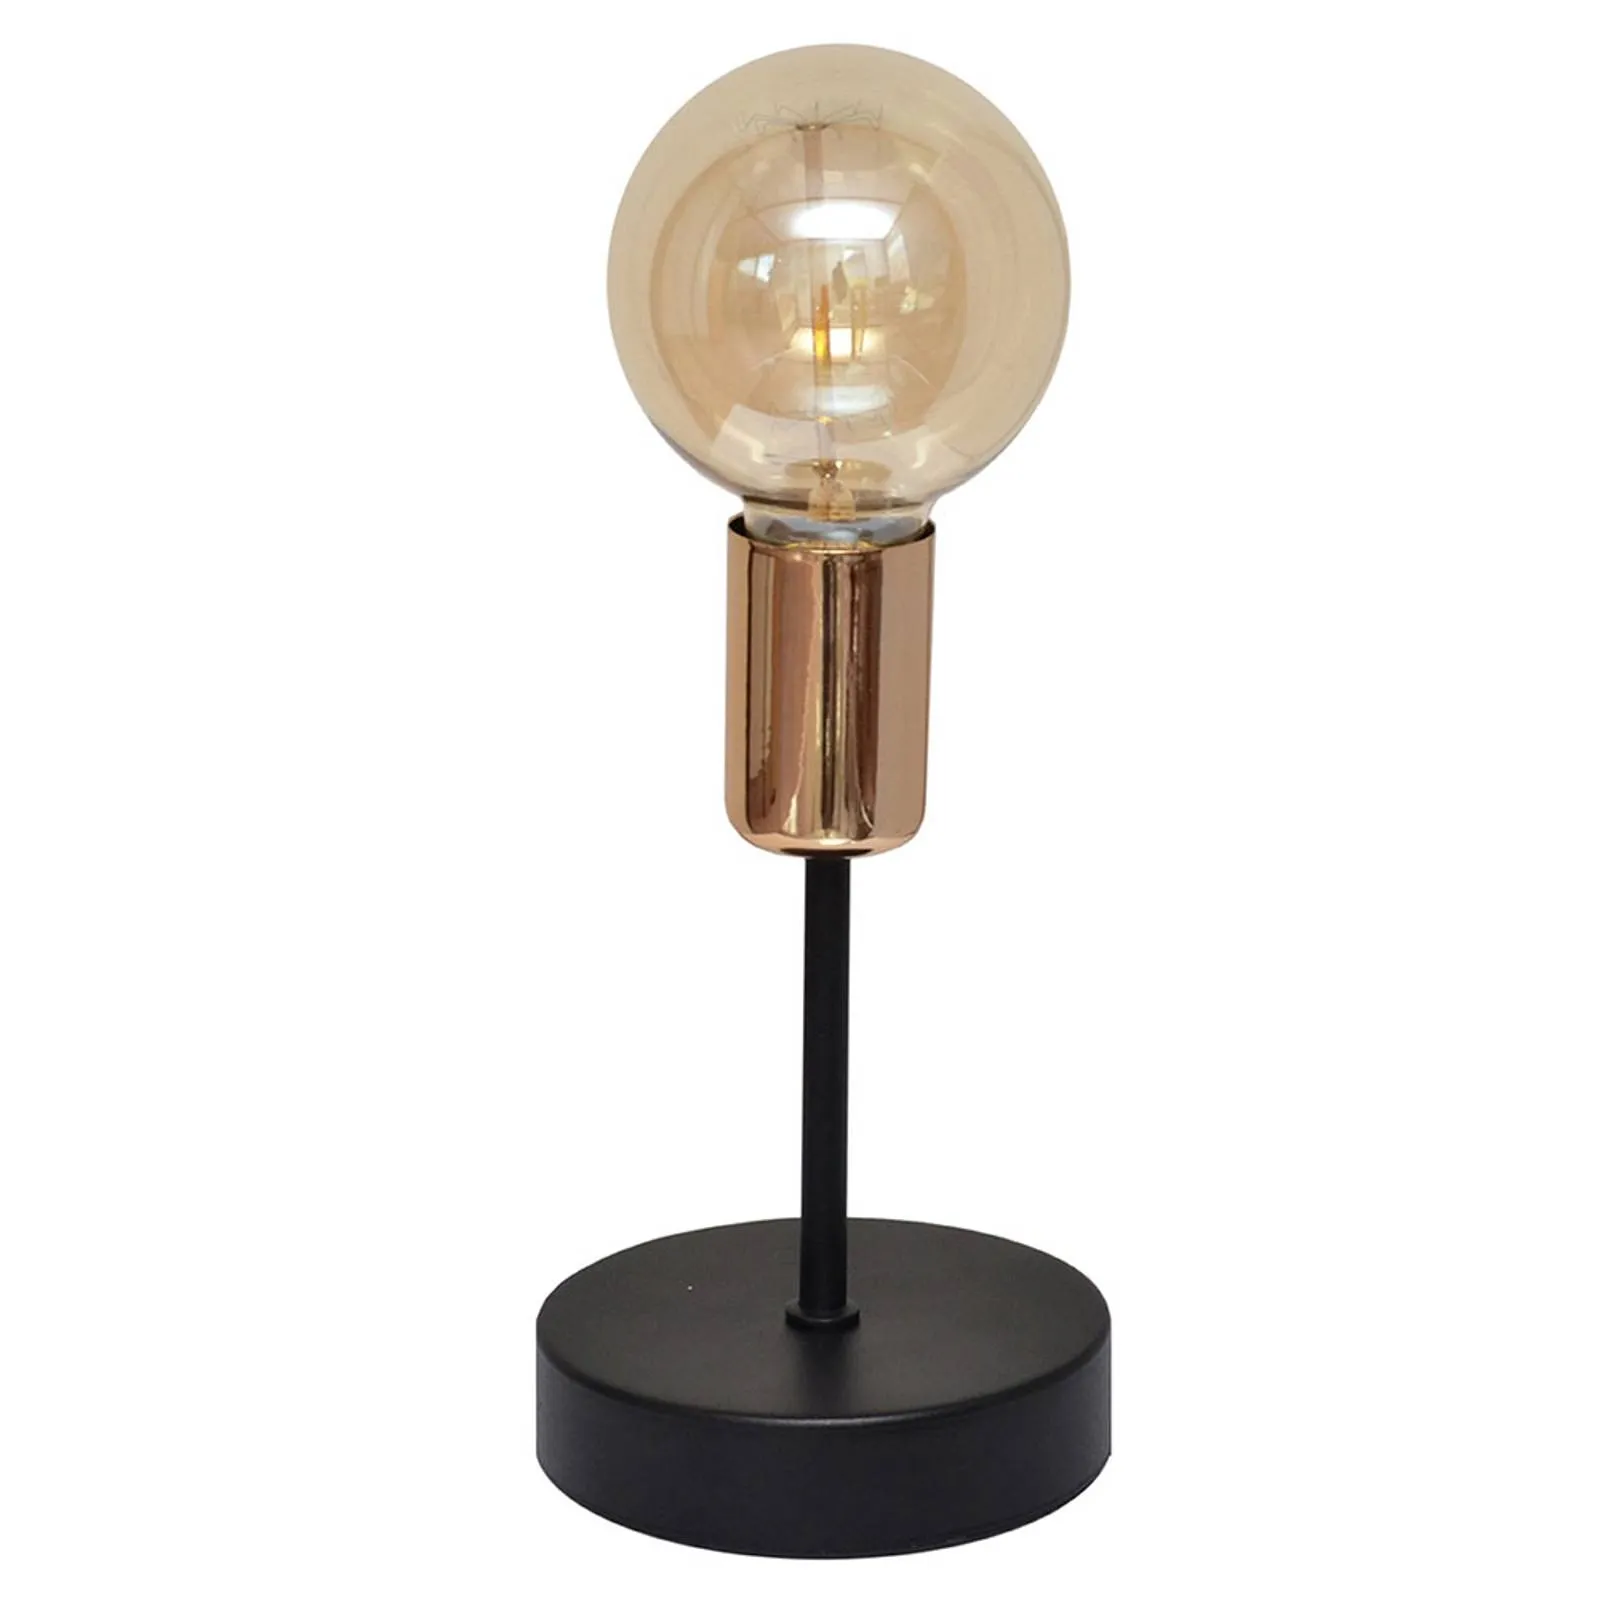 Tube table lamp in black with copper detail